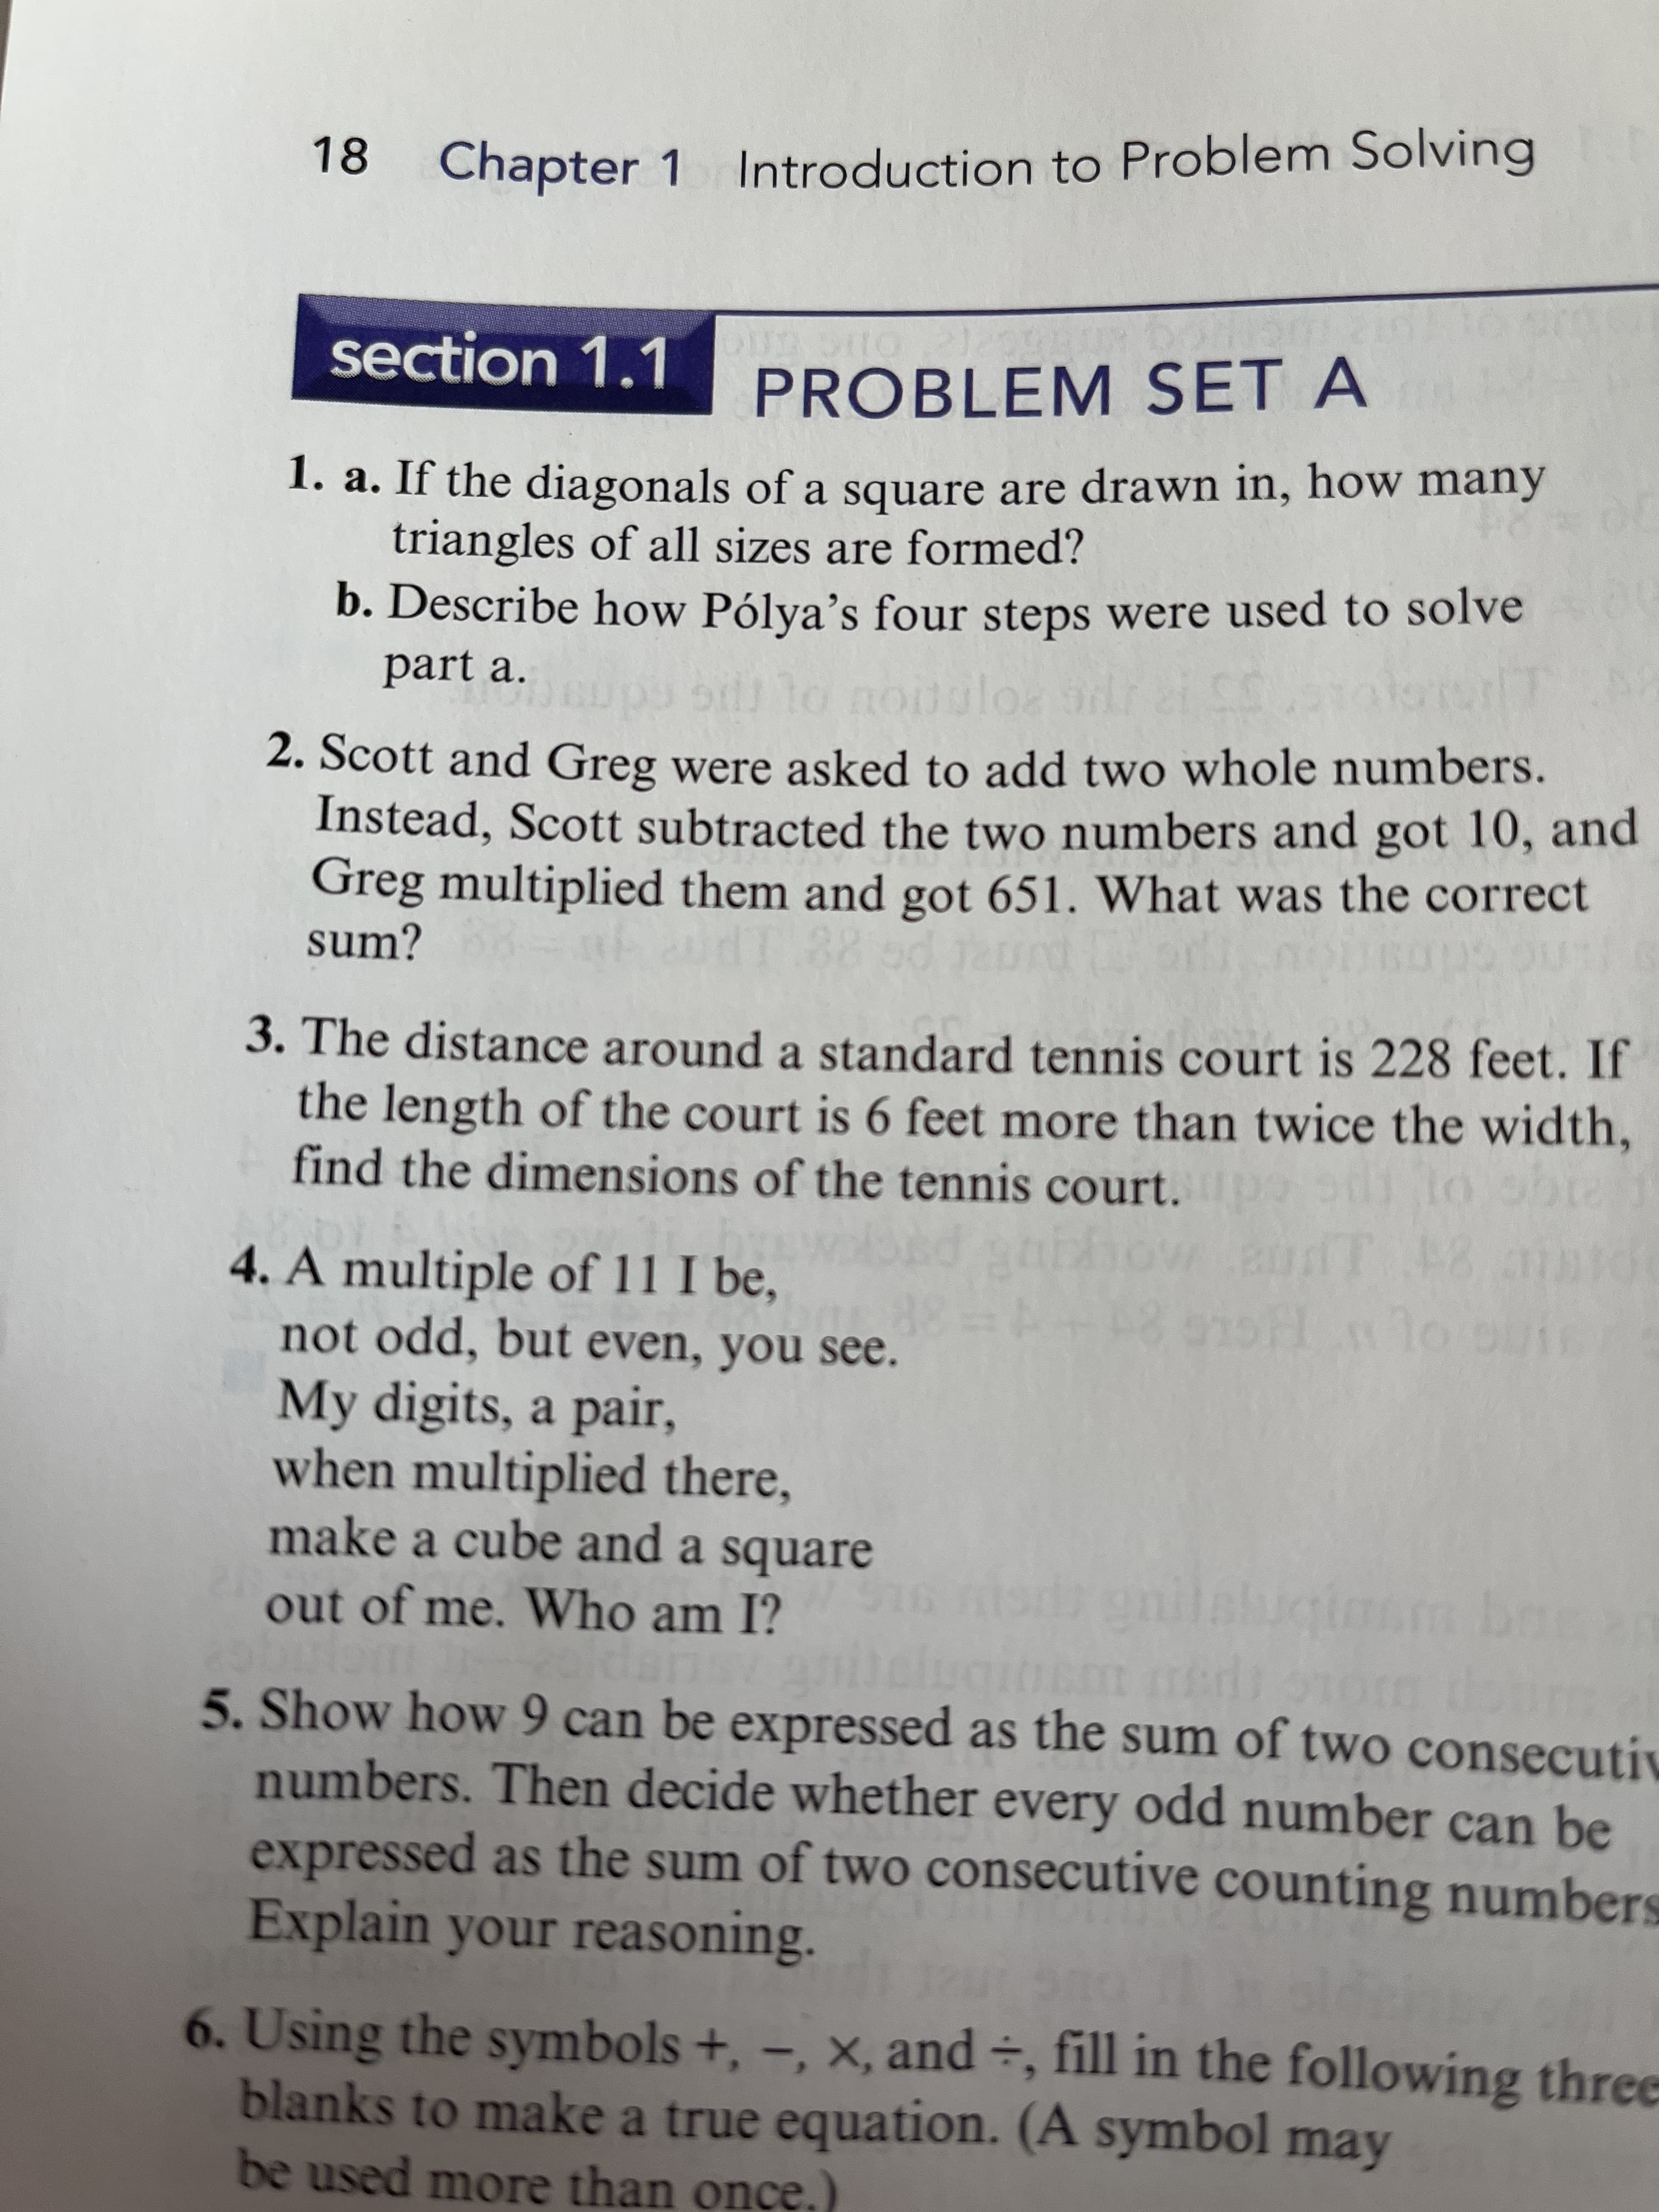 18
Chapter 1 Introduction to Problem Solving
section 1.1
PROBLEM SET A
1. a. If the diagonals of a square are drawn in, how many
triangles of all sizes are formed?
b. Describe how Pólya's four steps were used to solve
part a.
to nouul
polos odr
2. Scott and Greg were asked to add two whole numbers.
Instead, Scott subtracted the two numbers and got 10, and
Greg multiplied them and got 651. What was the correct
sum?
3. The distance around a standard tennis court is 228 feet. If
the length of the court is 6 feet more than twice the width,
find the dimensions of the tennis court.
4. A multiple of 11 I be,
not odd, but even, you see.
My digits, a pair,
when multiplied there,
make a cube and a square
out of me. Who am I?
5. Show how 9 can be expressed as the sum of two consecutiv
numbers. Then decide whether every odd number can be
expressed as the sum of two consecutive counting numbers
Explain your reasoning.
6. Using the symbols +, -, x, and ÷, fill in the following three
blanks to make a true equation. (A symbol may
be used more than once.)
